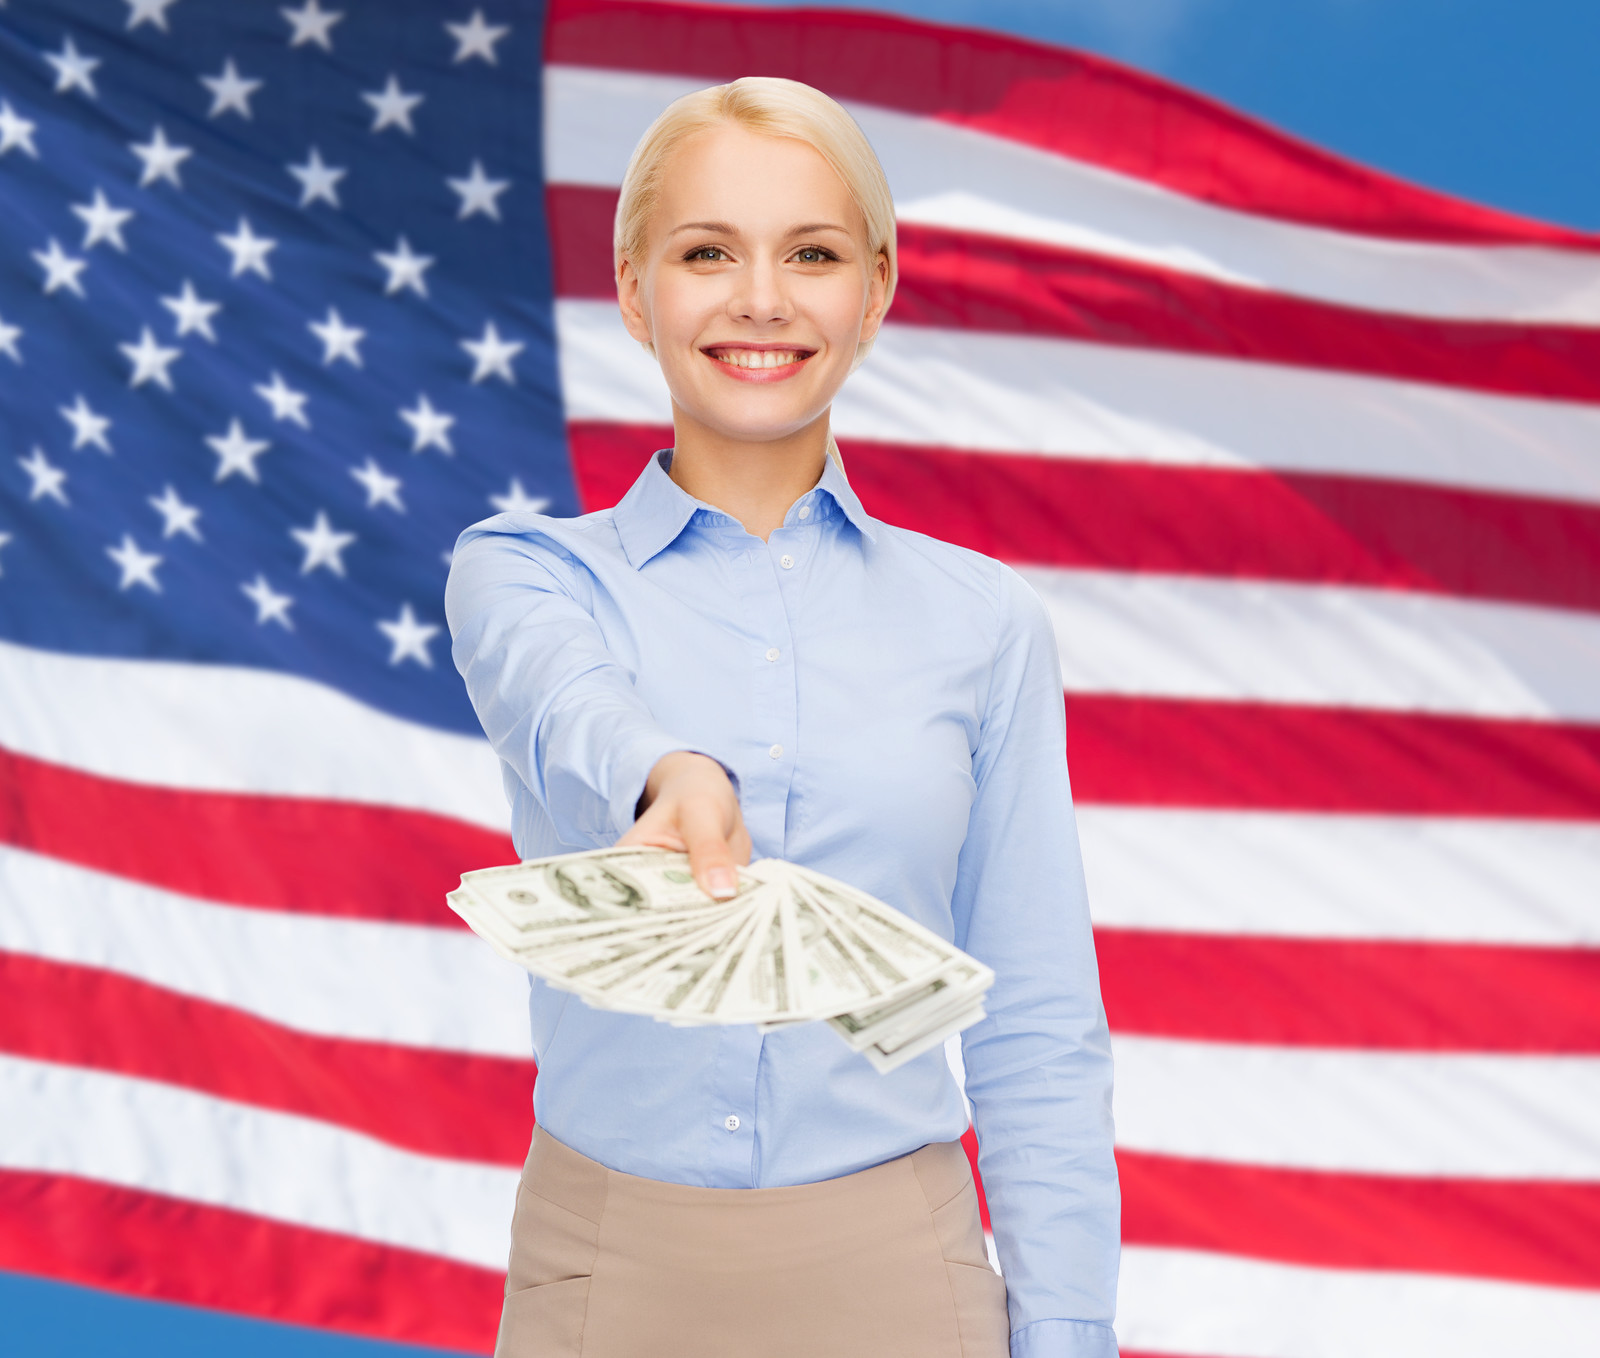 woman with flag and money.jpg